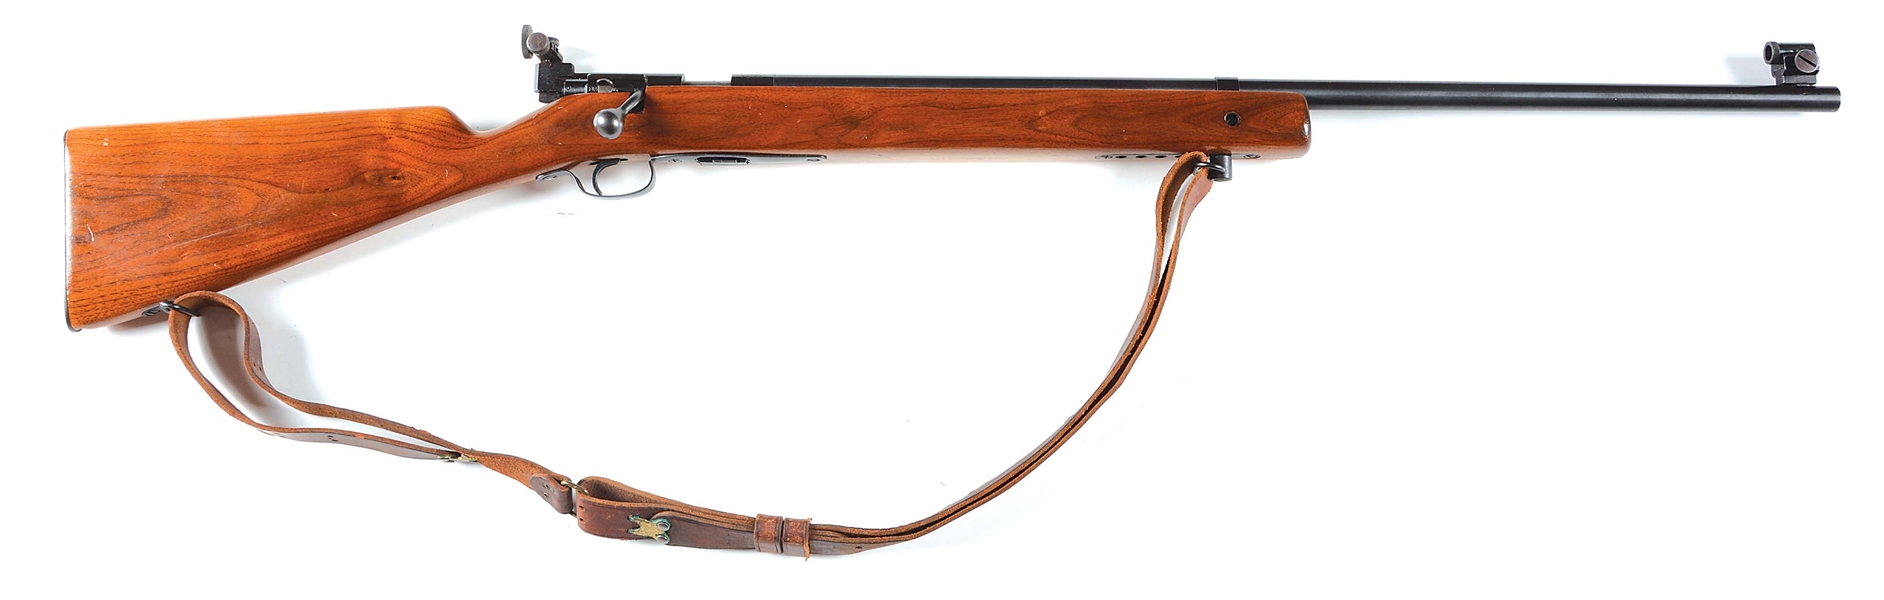 (C) WINCHESTER MODEL 75 BOLT ACTION RIFLE (1950).